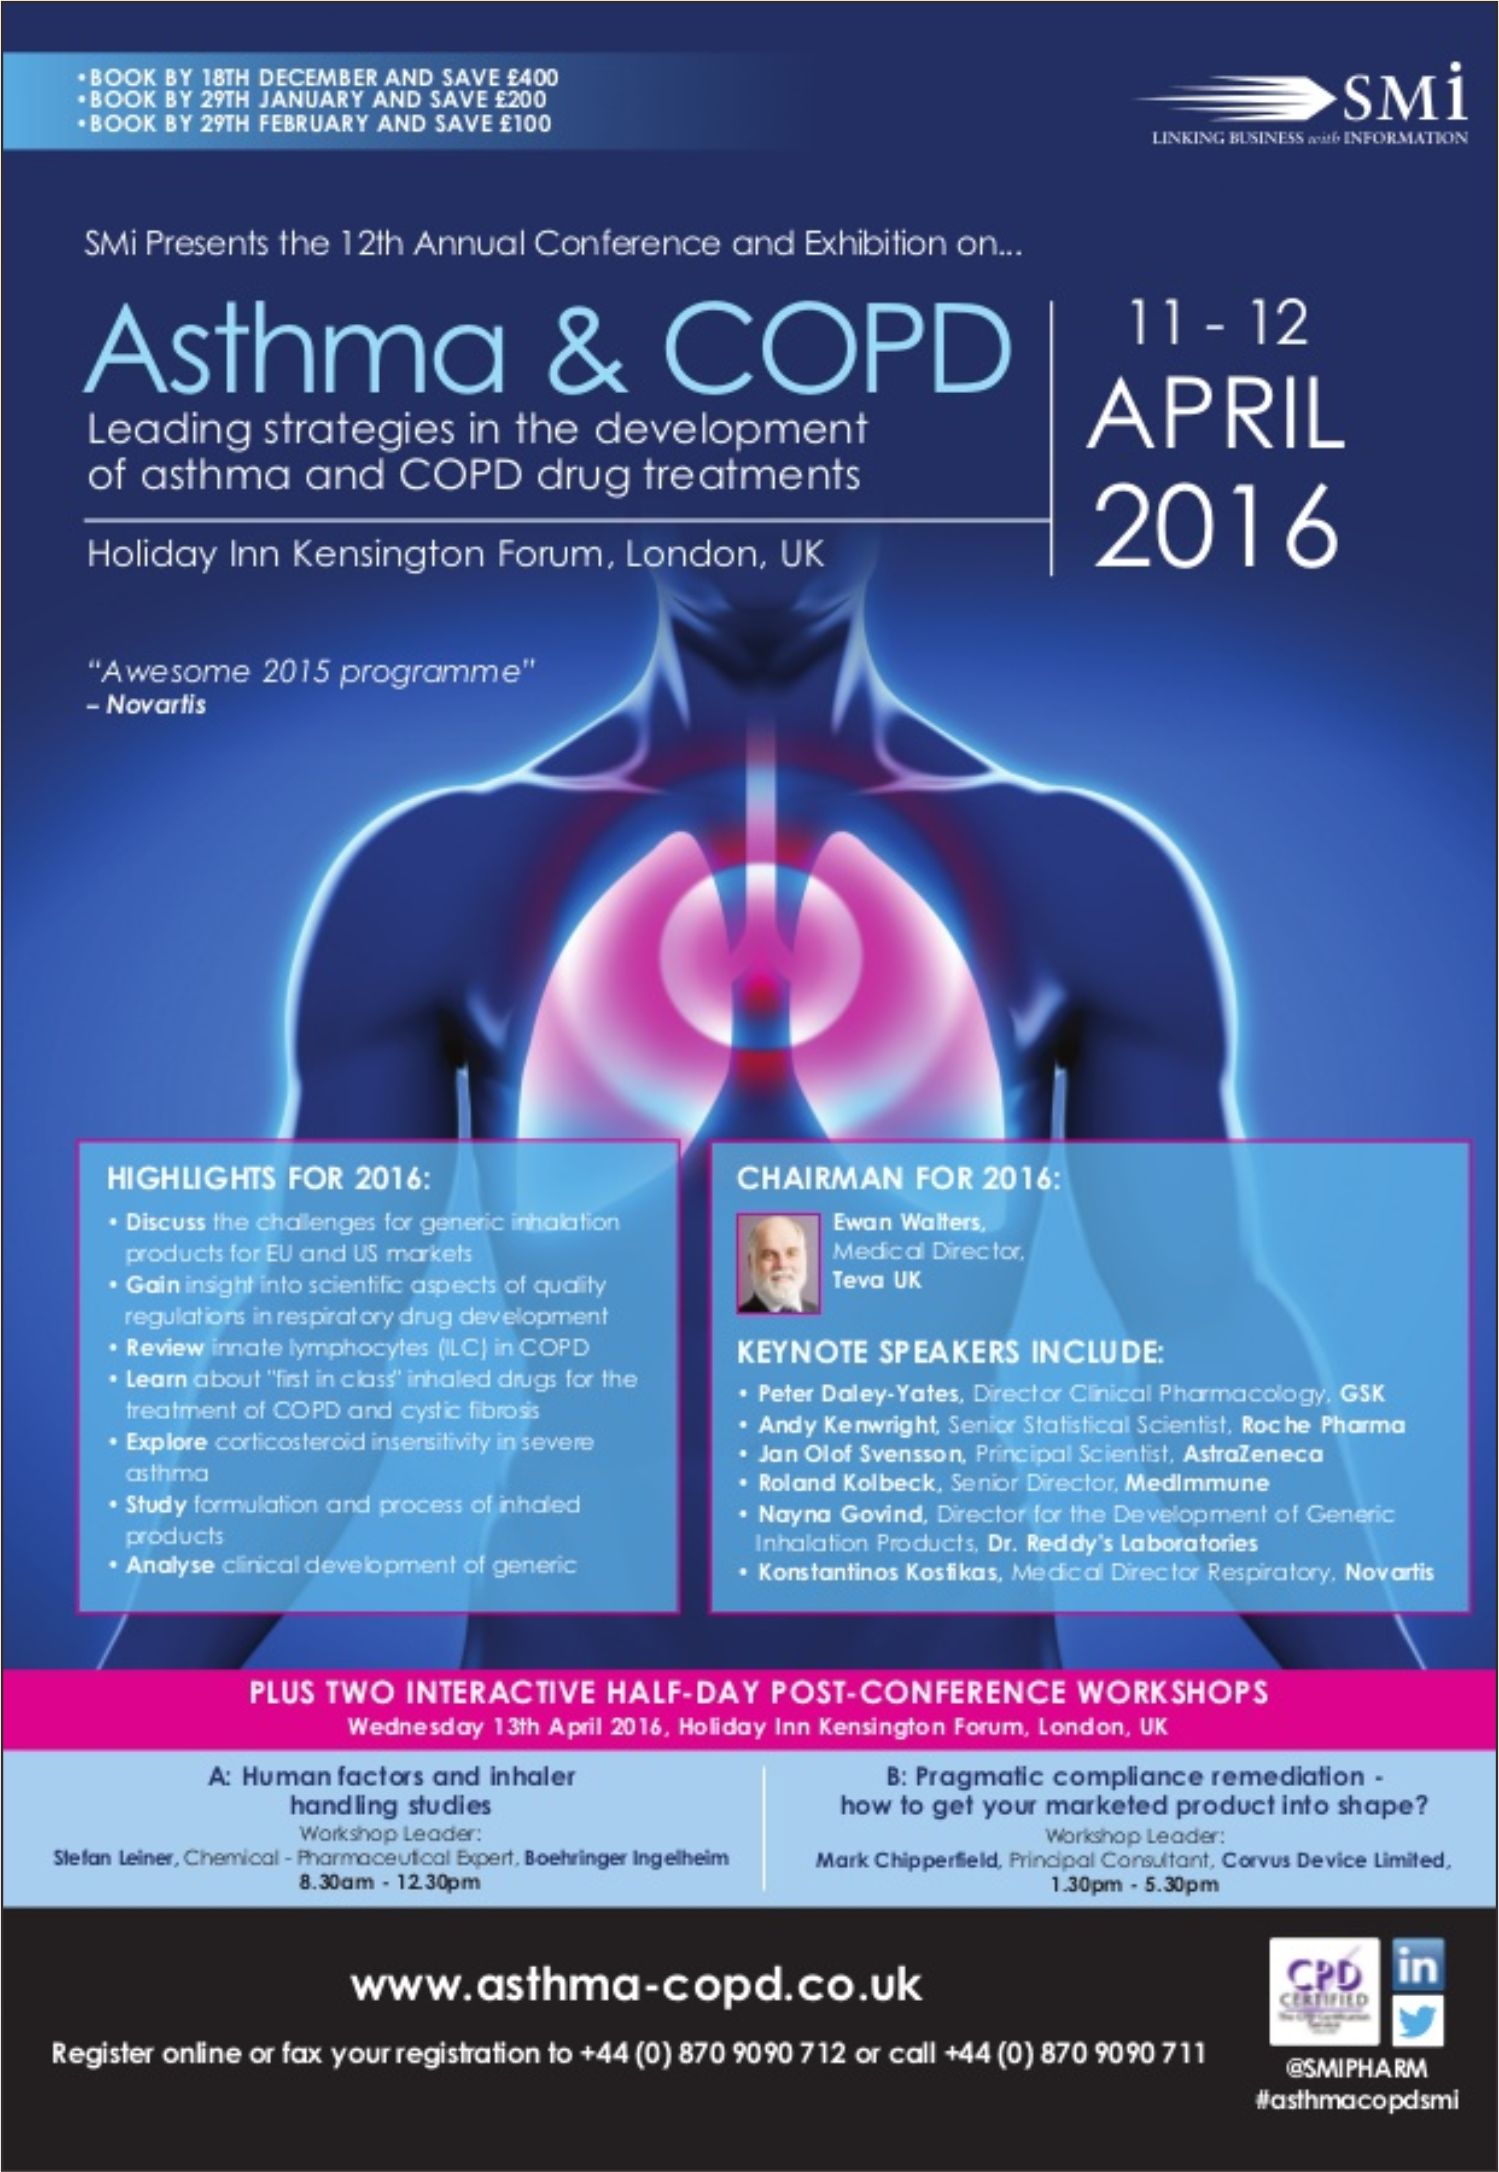 Asthma & COPD 2016